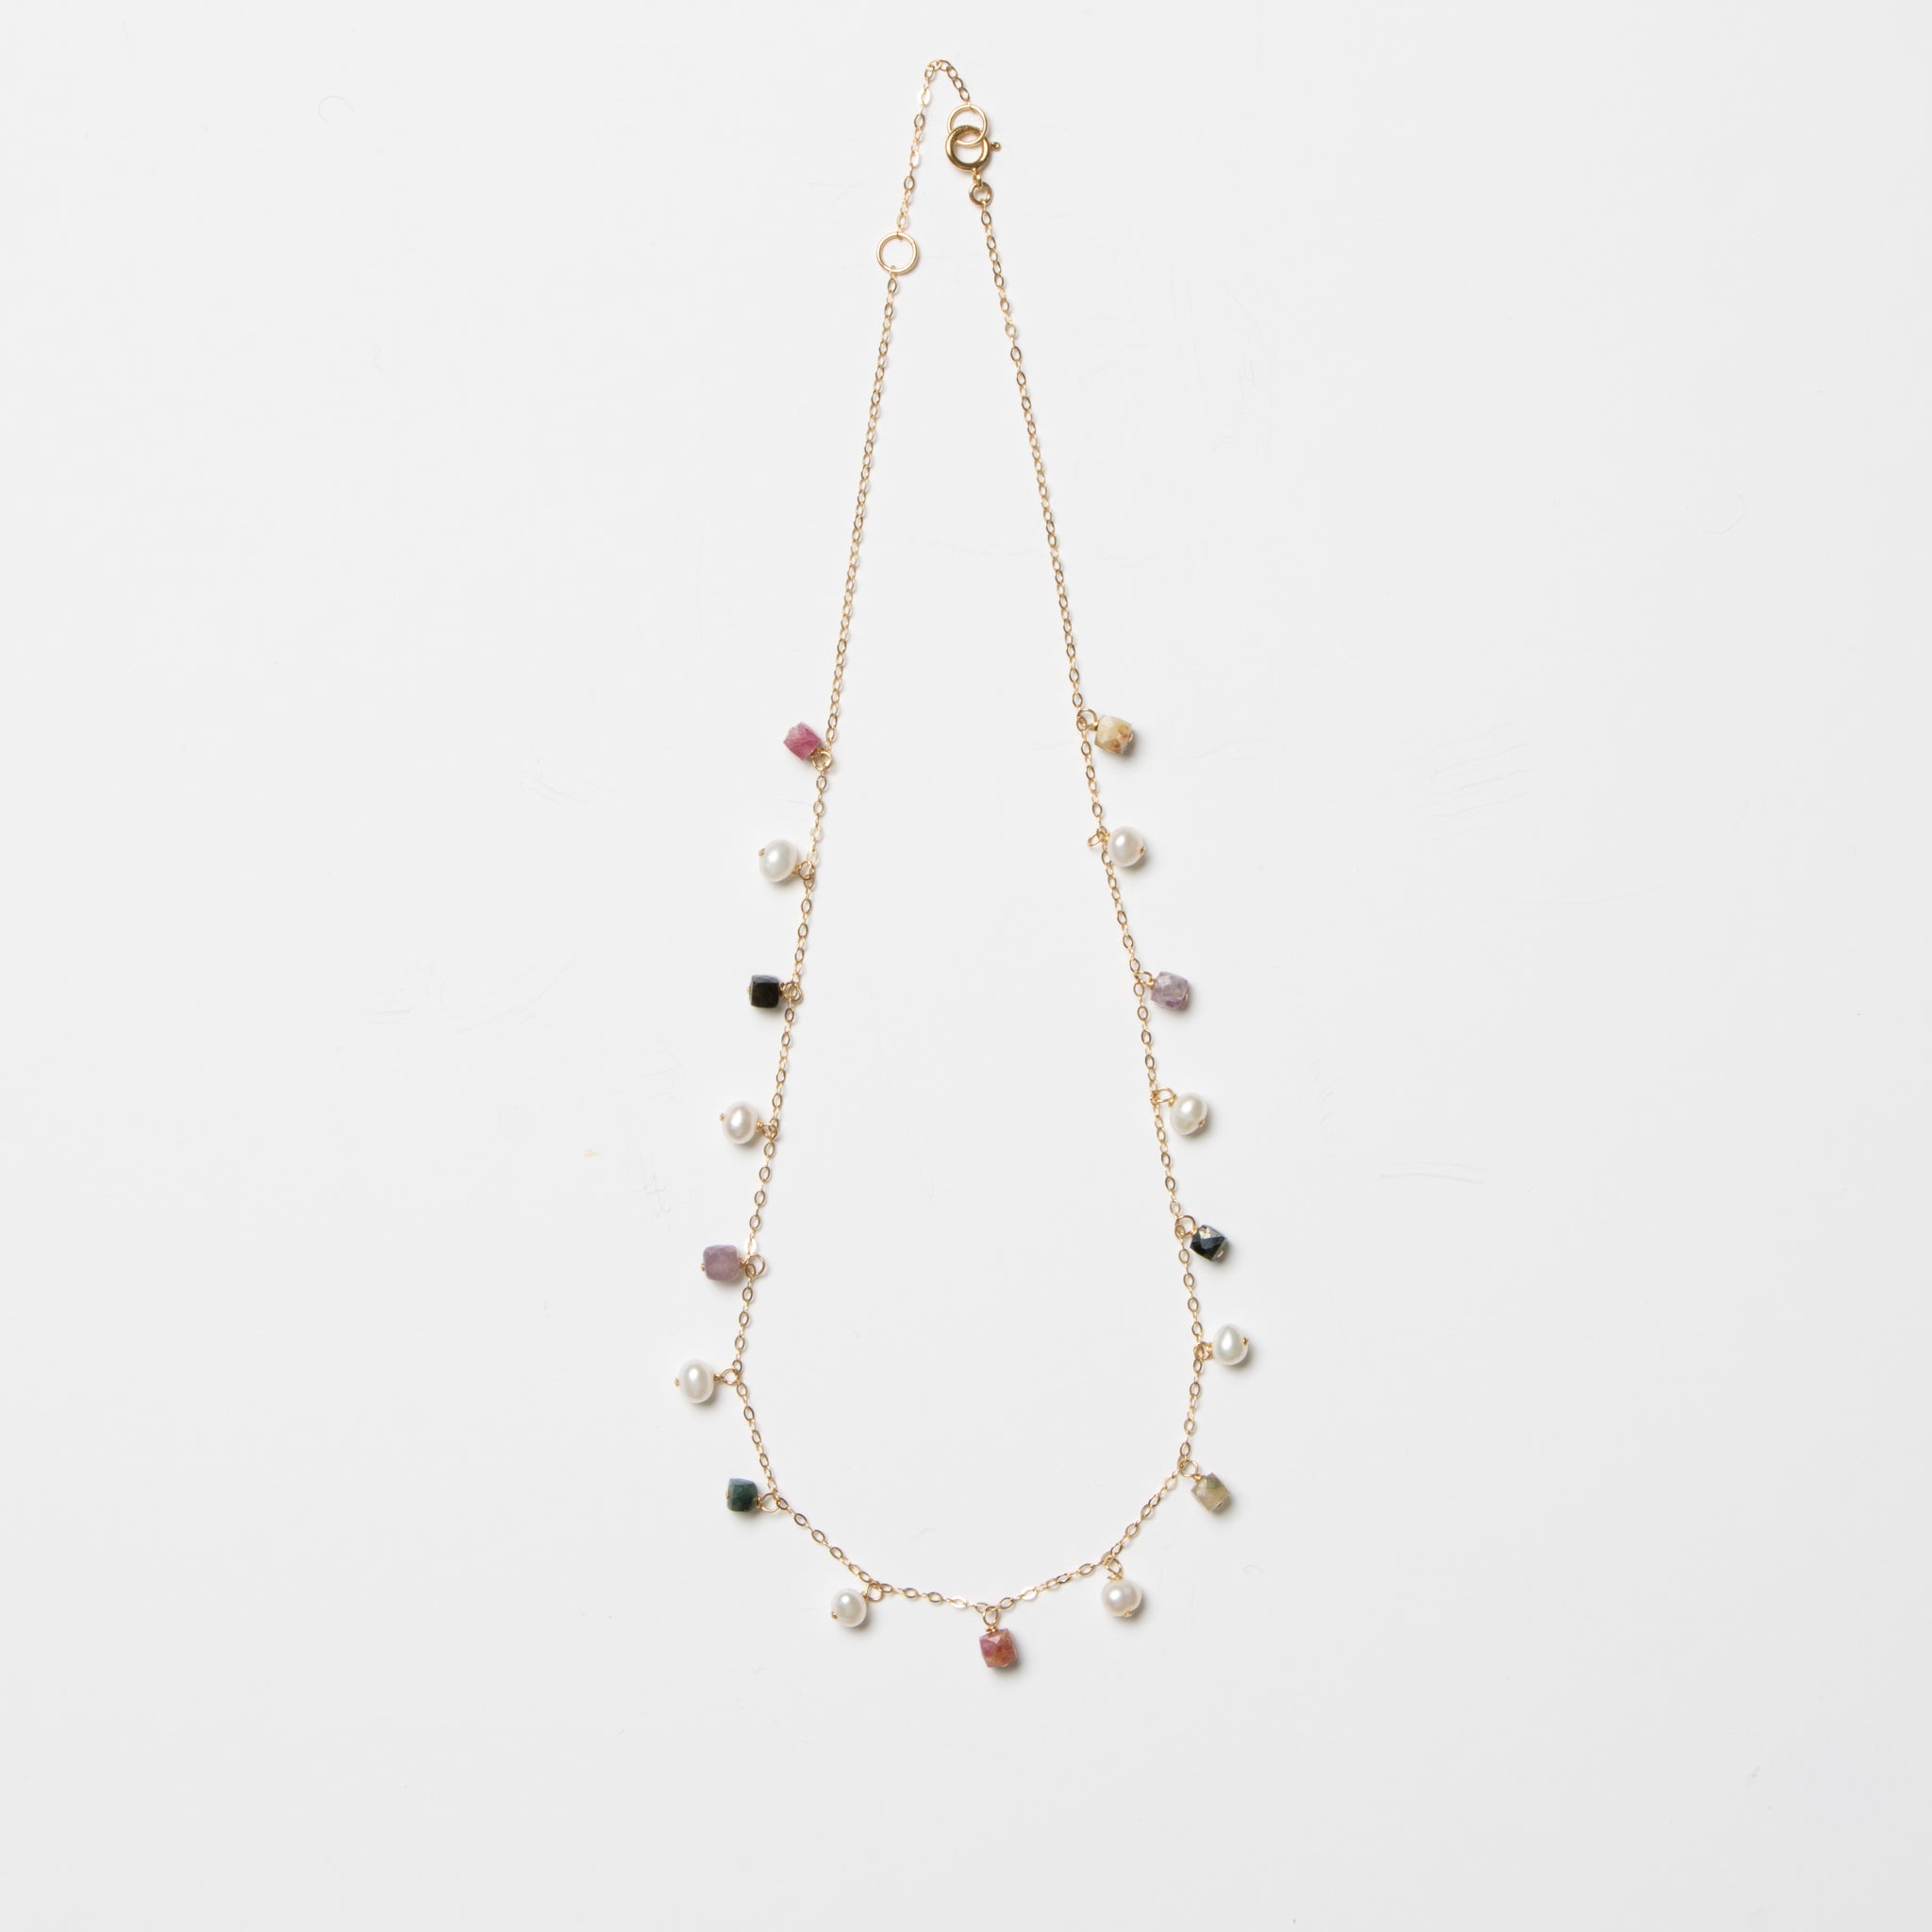 Dancing Pearls & Tourmaline Necklace